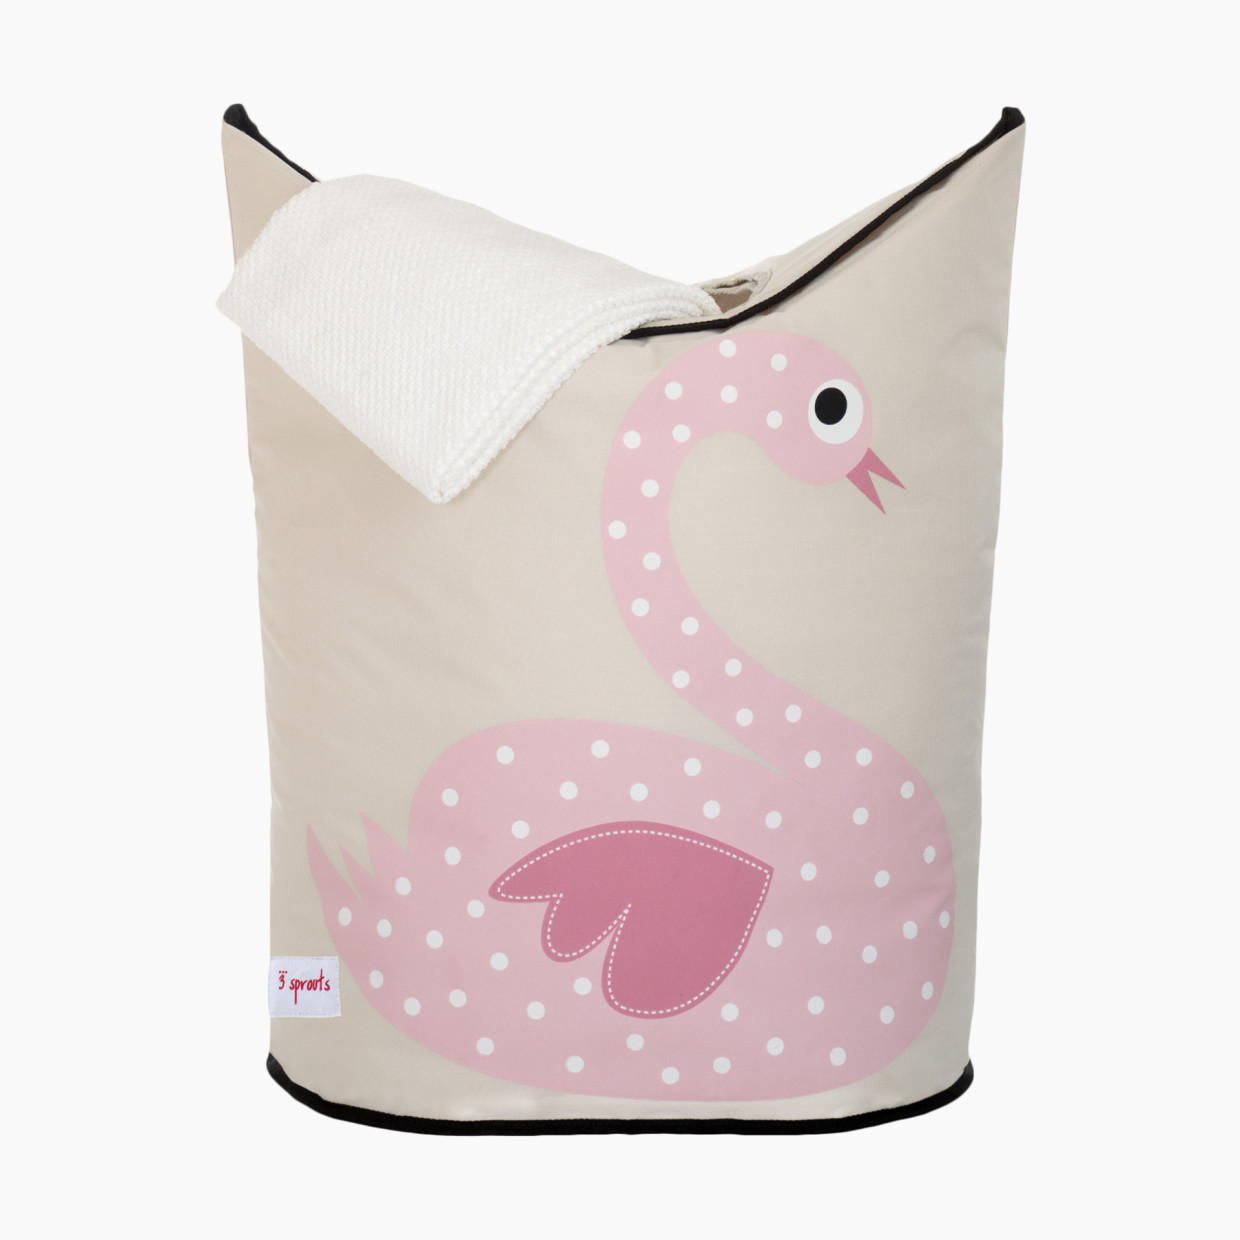 3 Sprouts Laundry Hamper - Pink Swan.